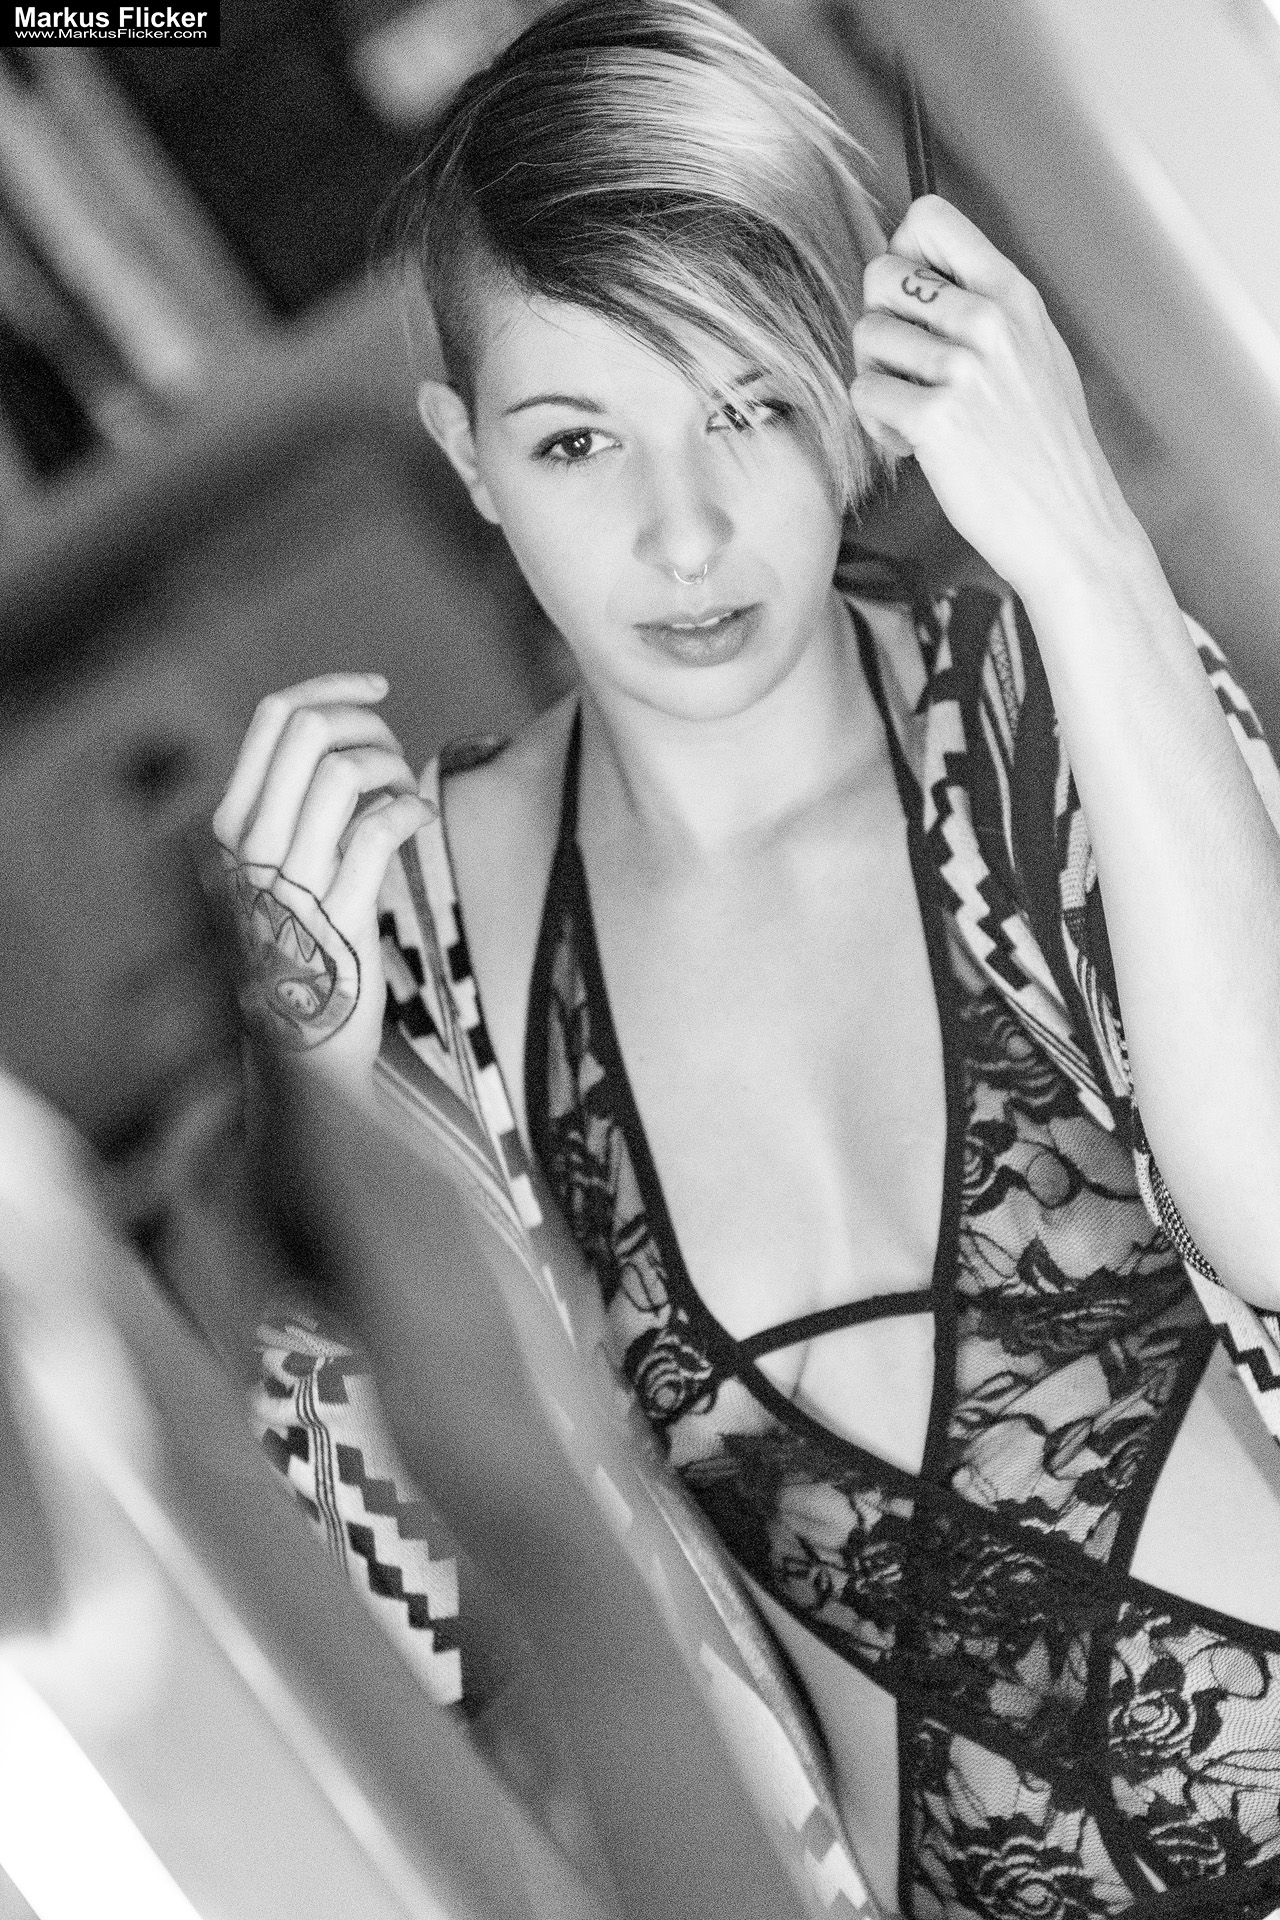 Erotic Art In The Mirror Female Model Lisa in Dessous Photography im Spiegel